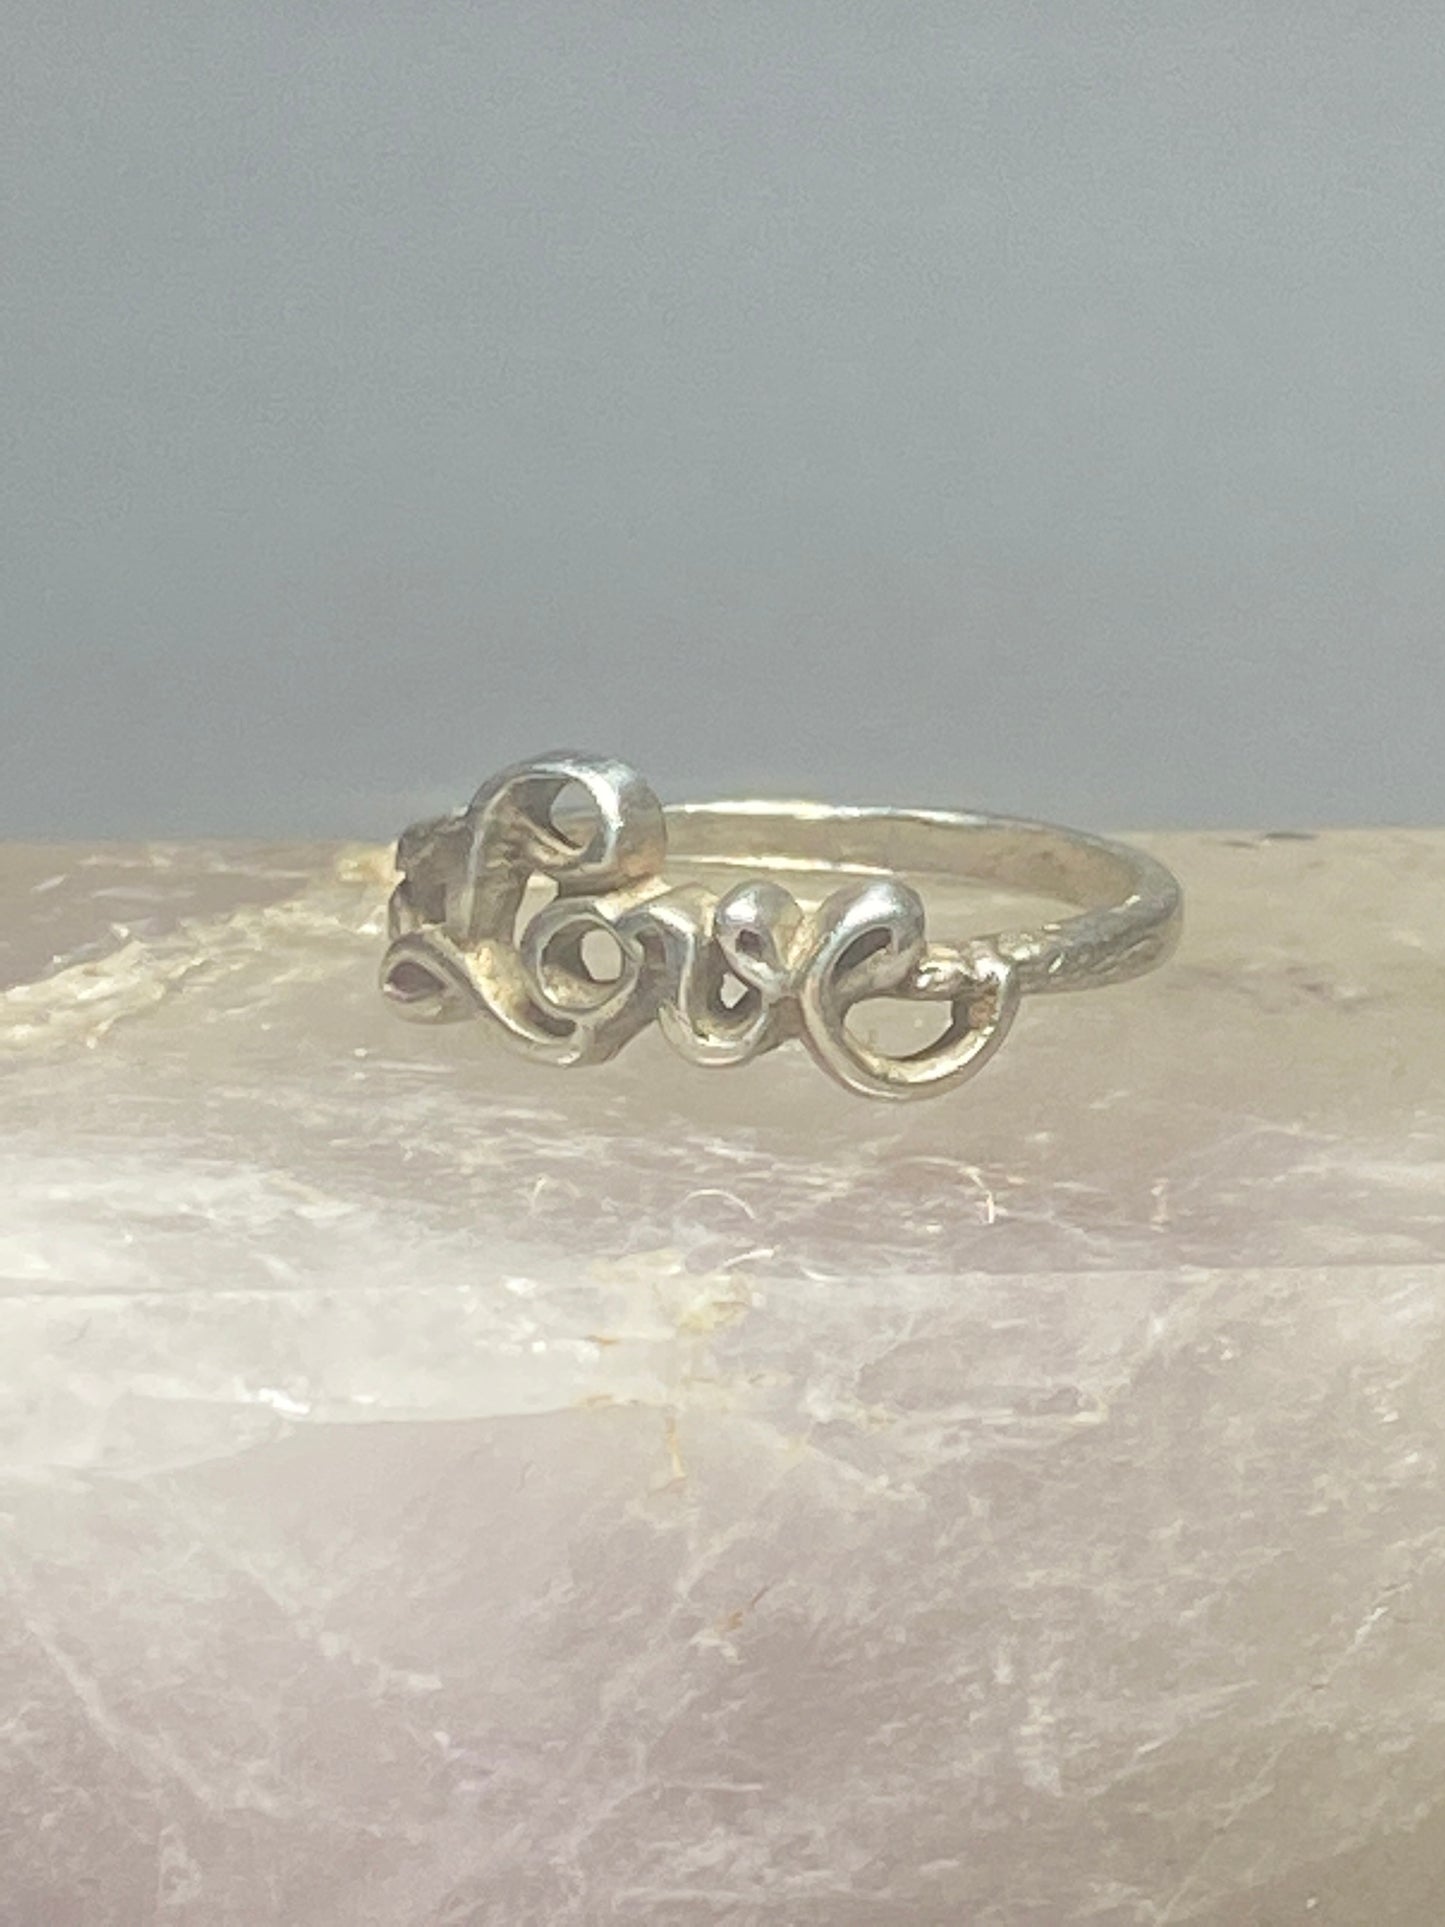 Love ring friendship word band sterling silver ring women girls